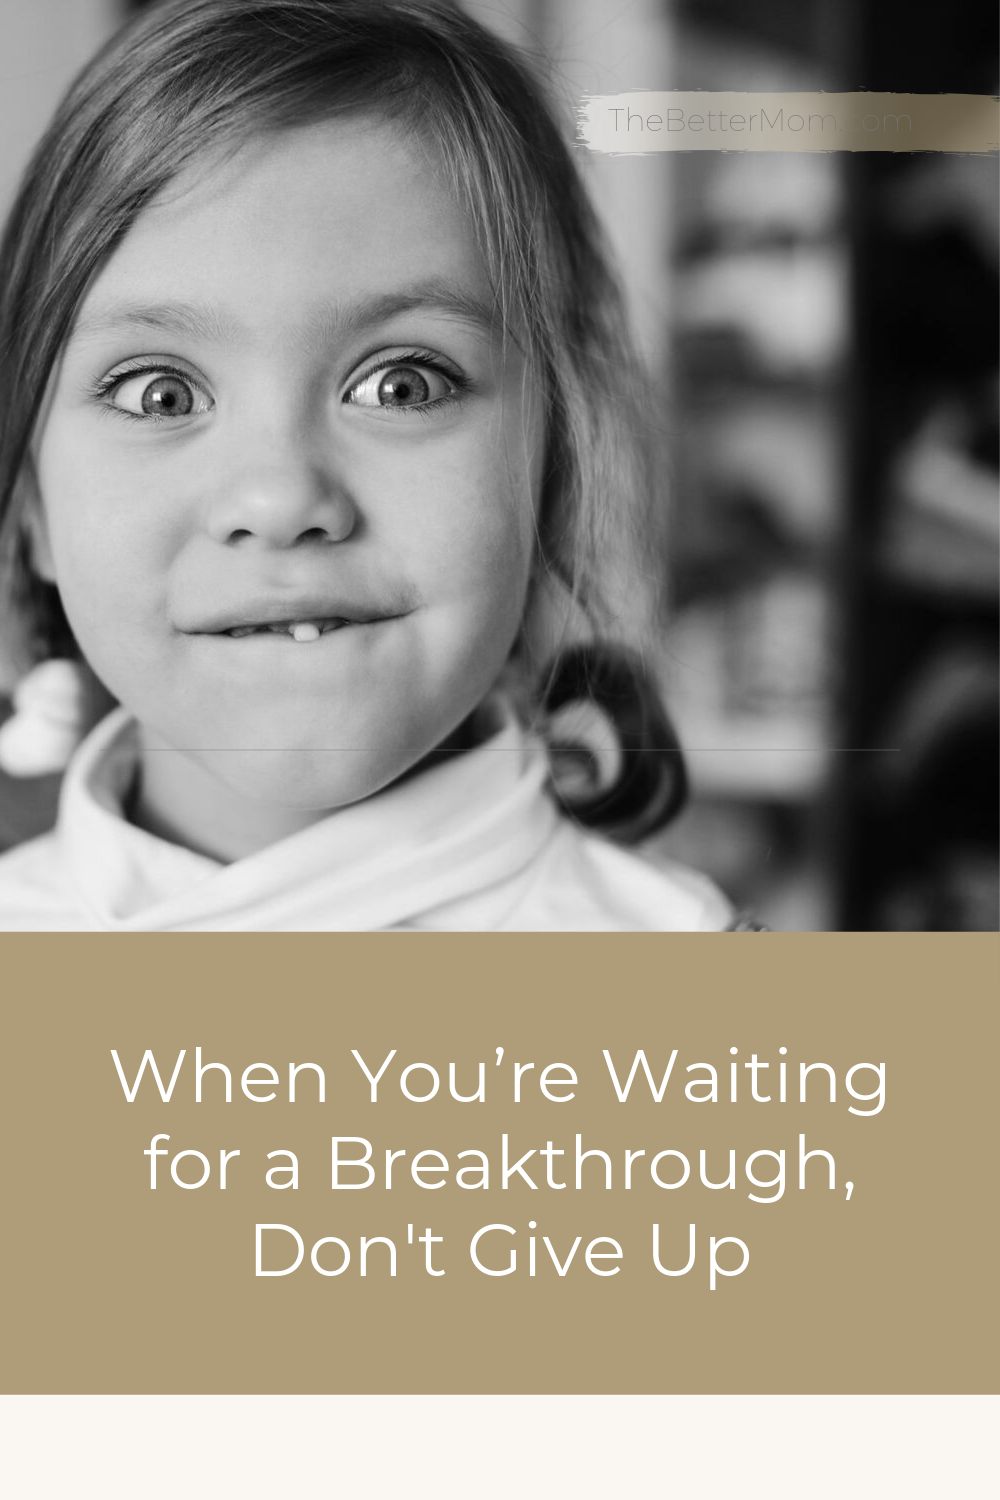 When You're Waiting for a Breakthrough